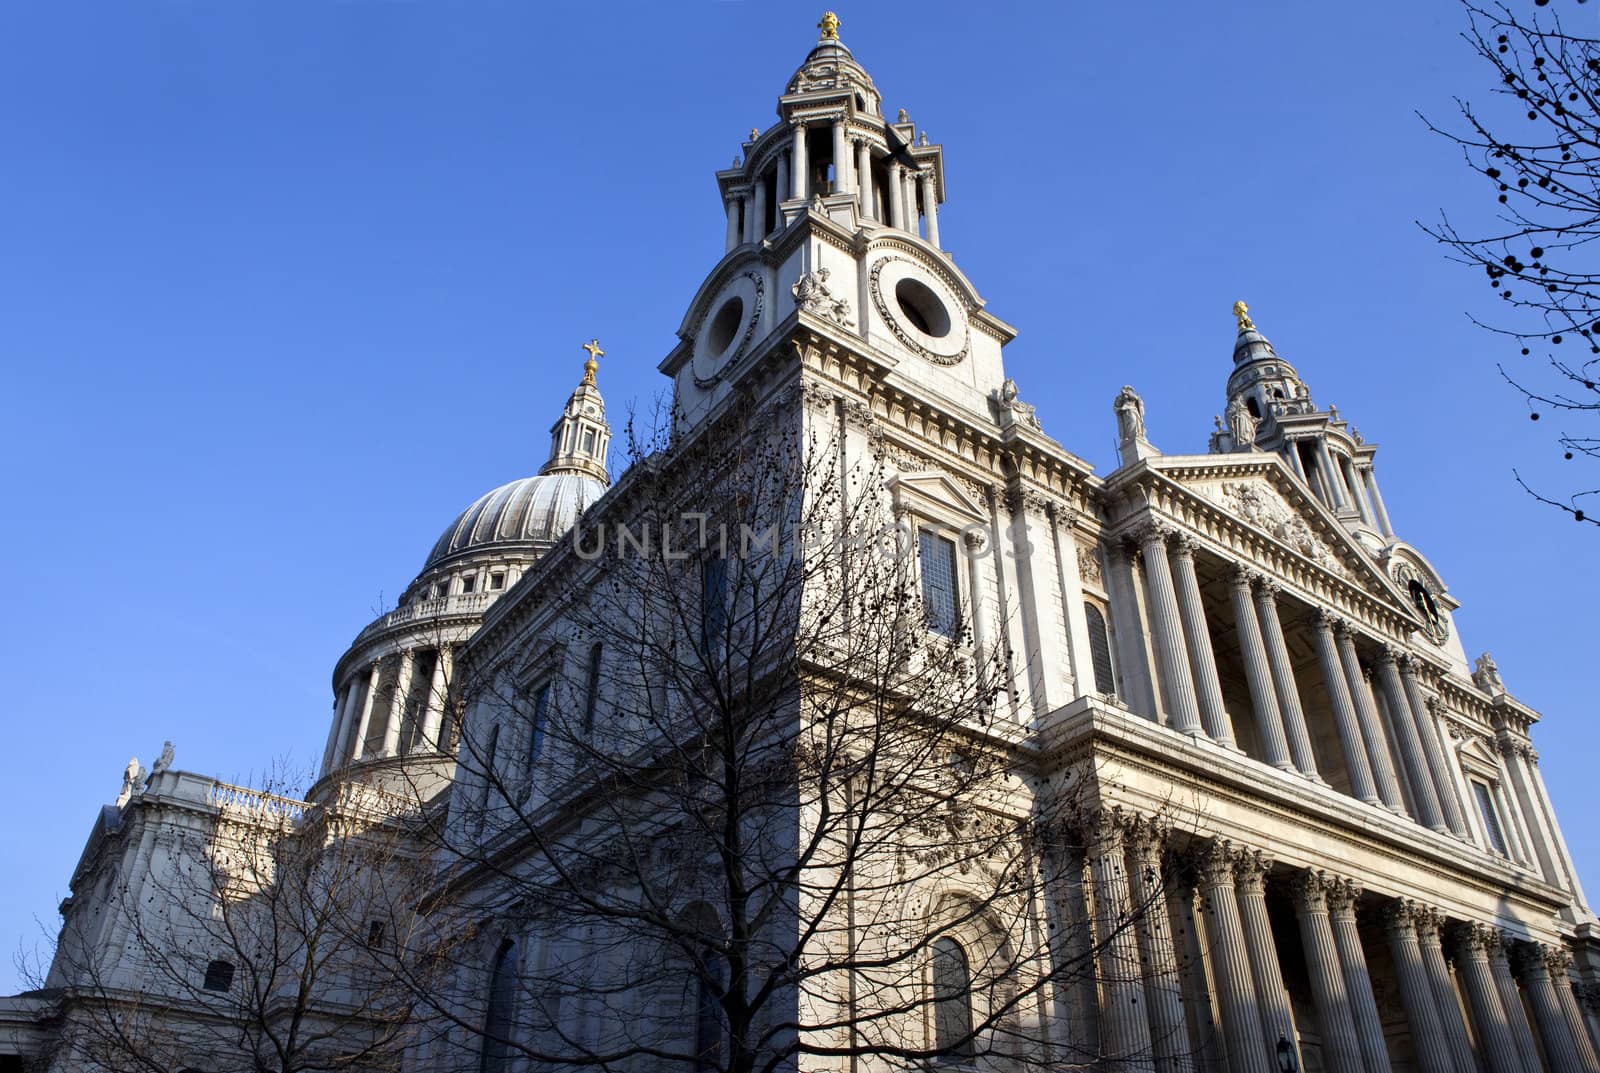 St. Paul's Cathedral in London.